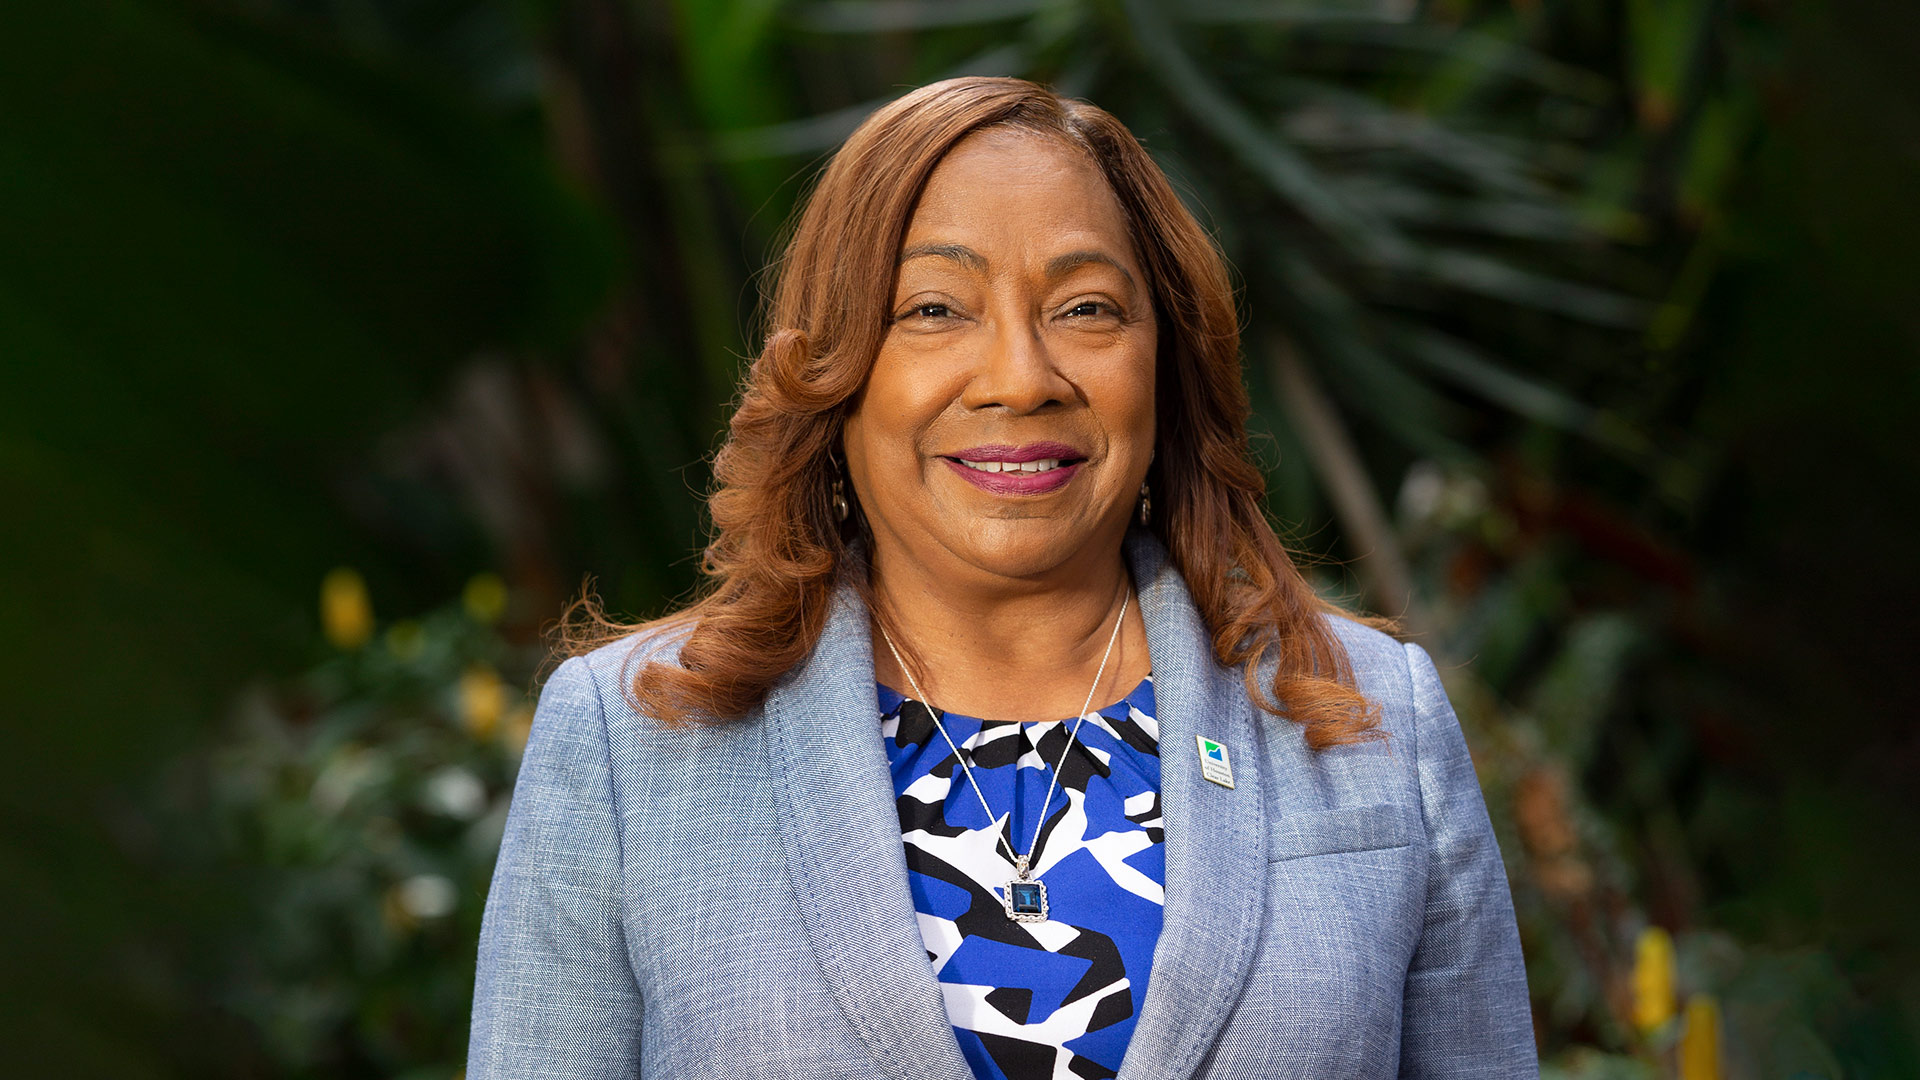 PHOTO: Portrait of UHCL Dean for the College of Education, Joan Pedro. Photo courtesy of UHCL Marketing and Communications.